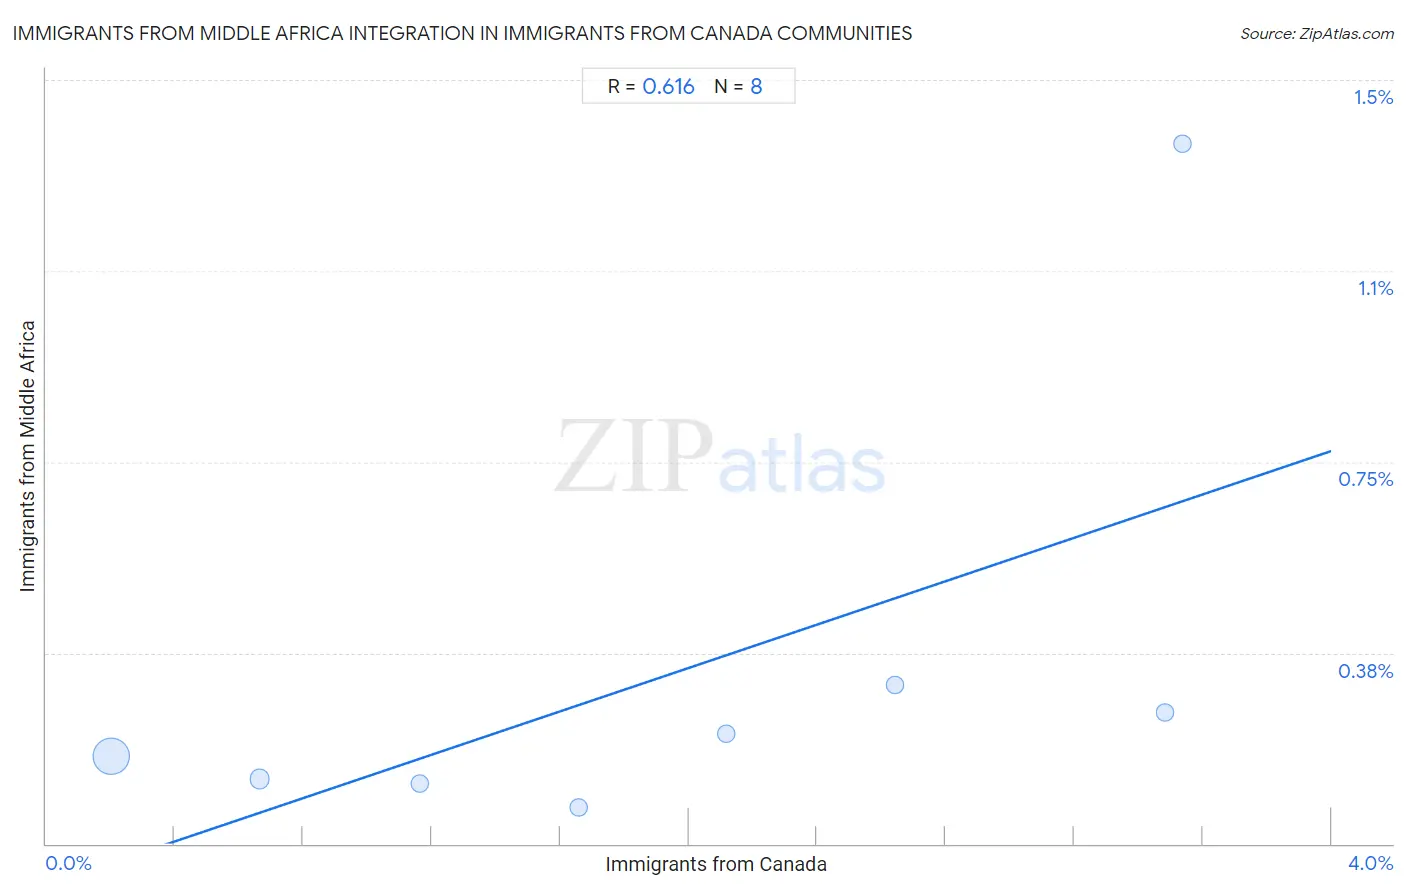 Immigrants from Canada Integration in Immigrants from Middle Africa Communities